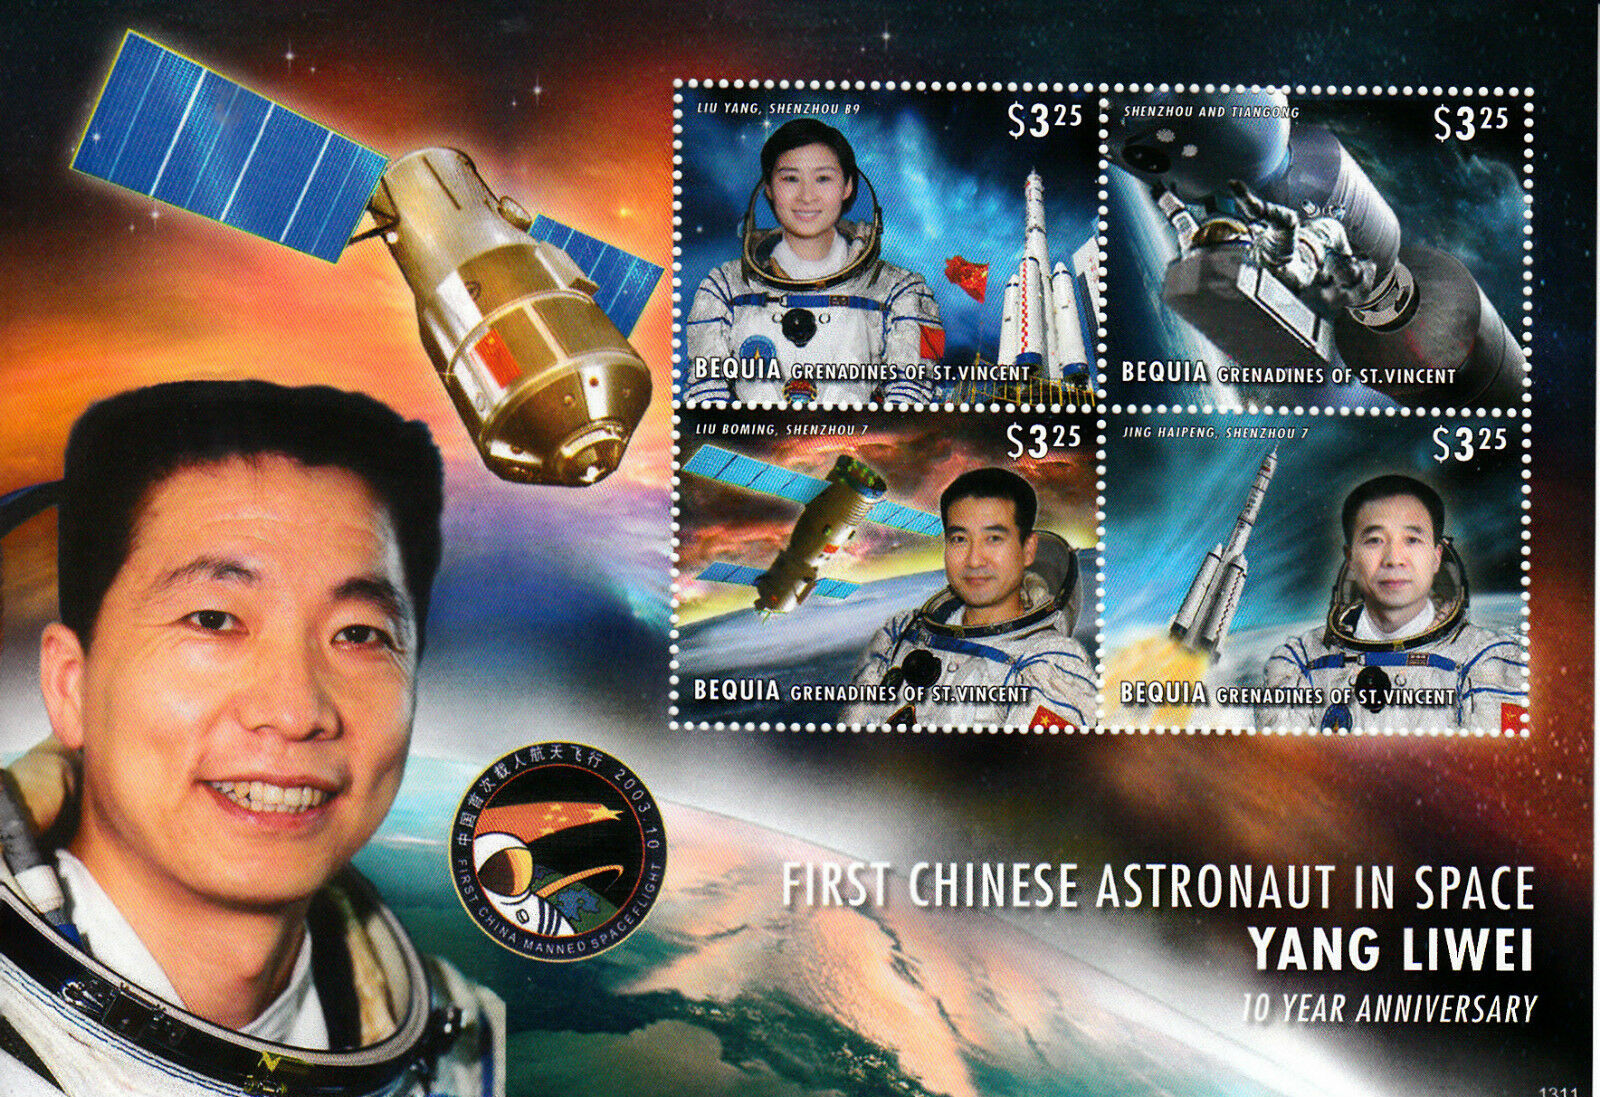 Bequia Gren St Vincent 2013 First Chinese Astronaut Space II 4v M/S Liwei Stamps